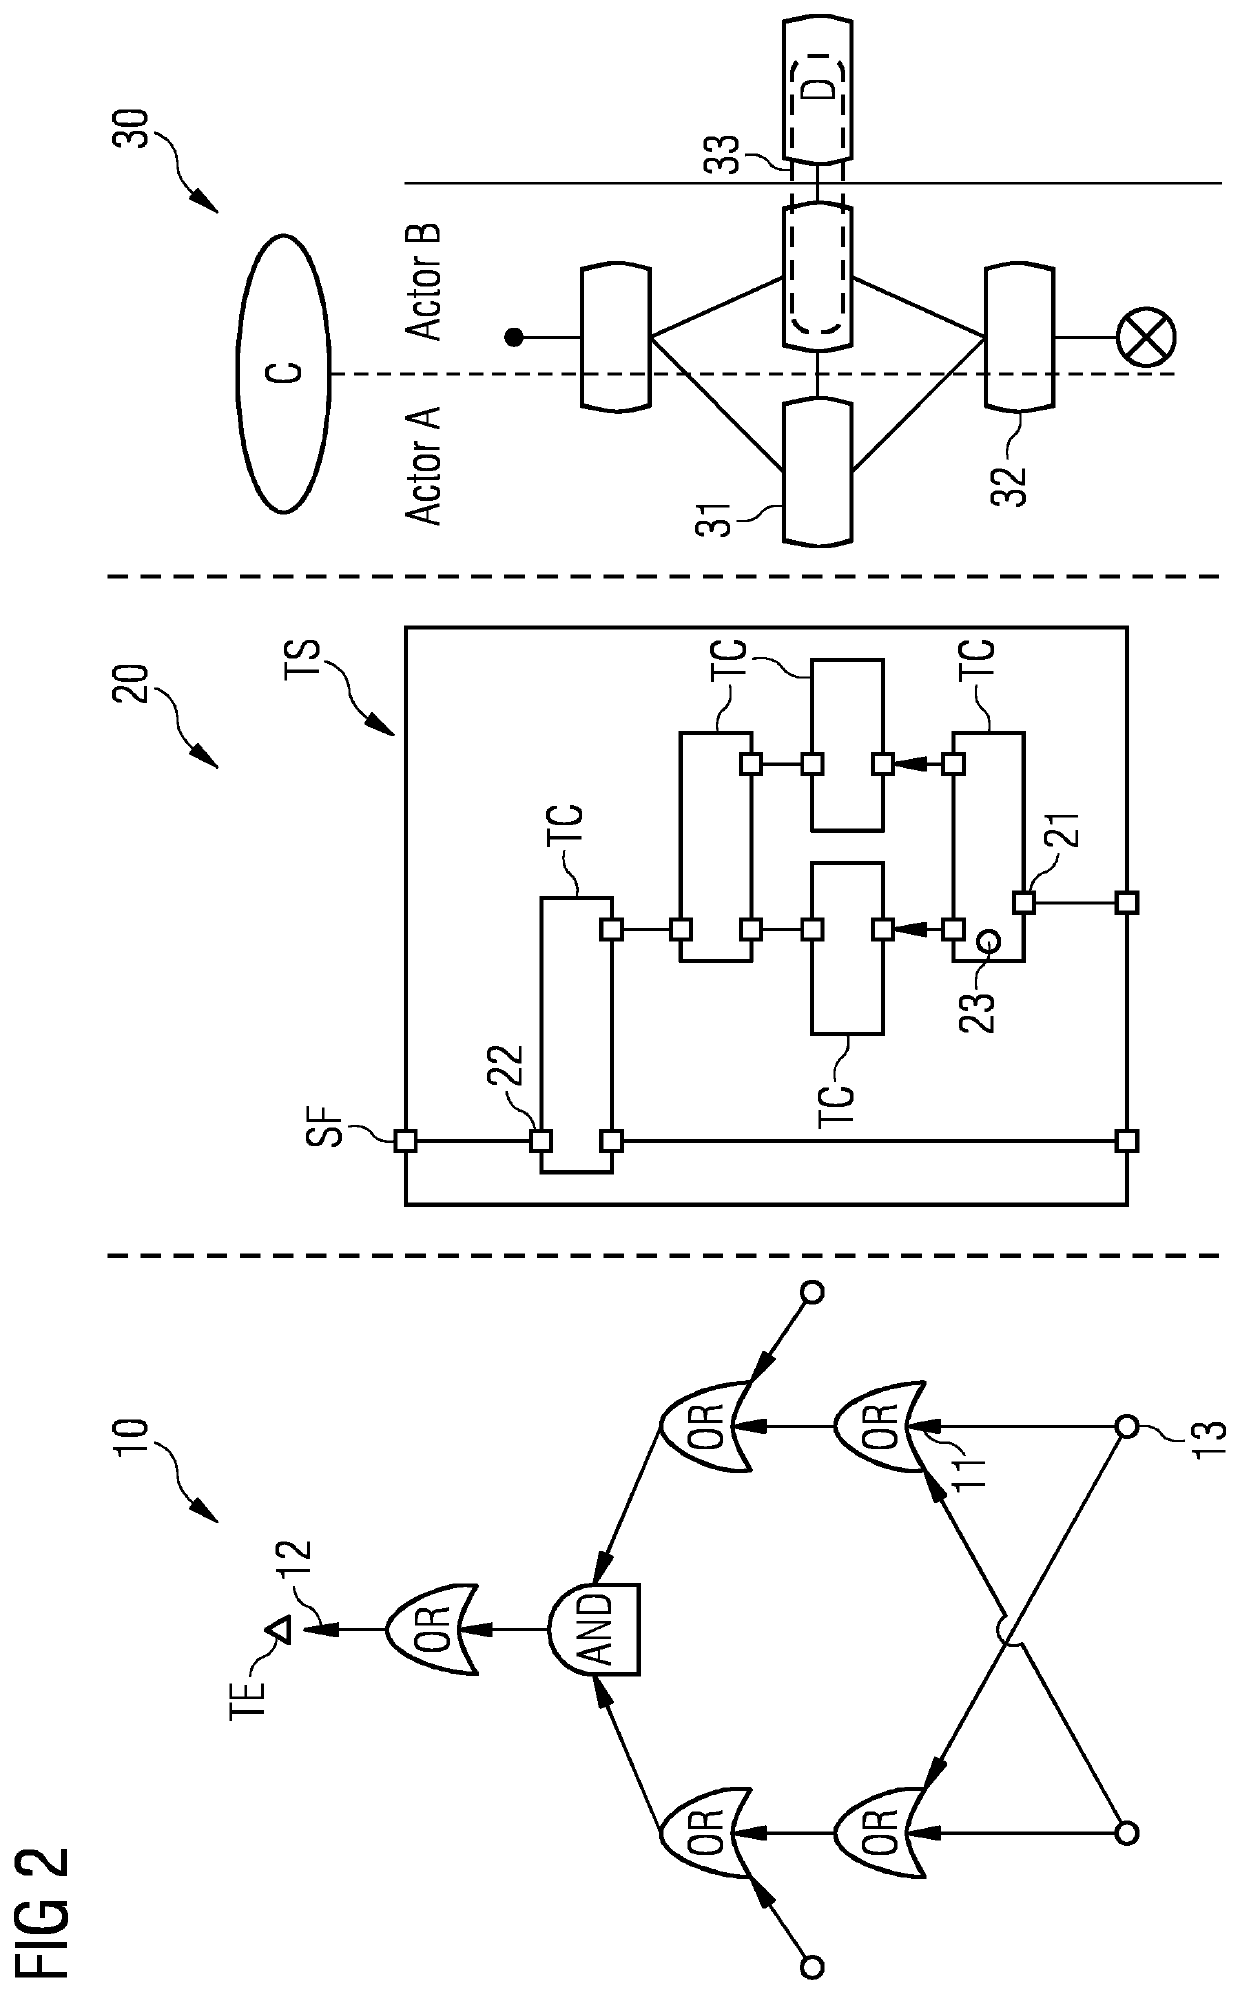 Computer-implemented method and computerized device for testing a technical system